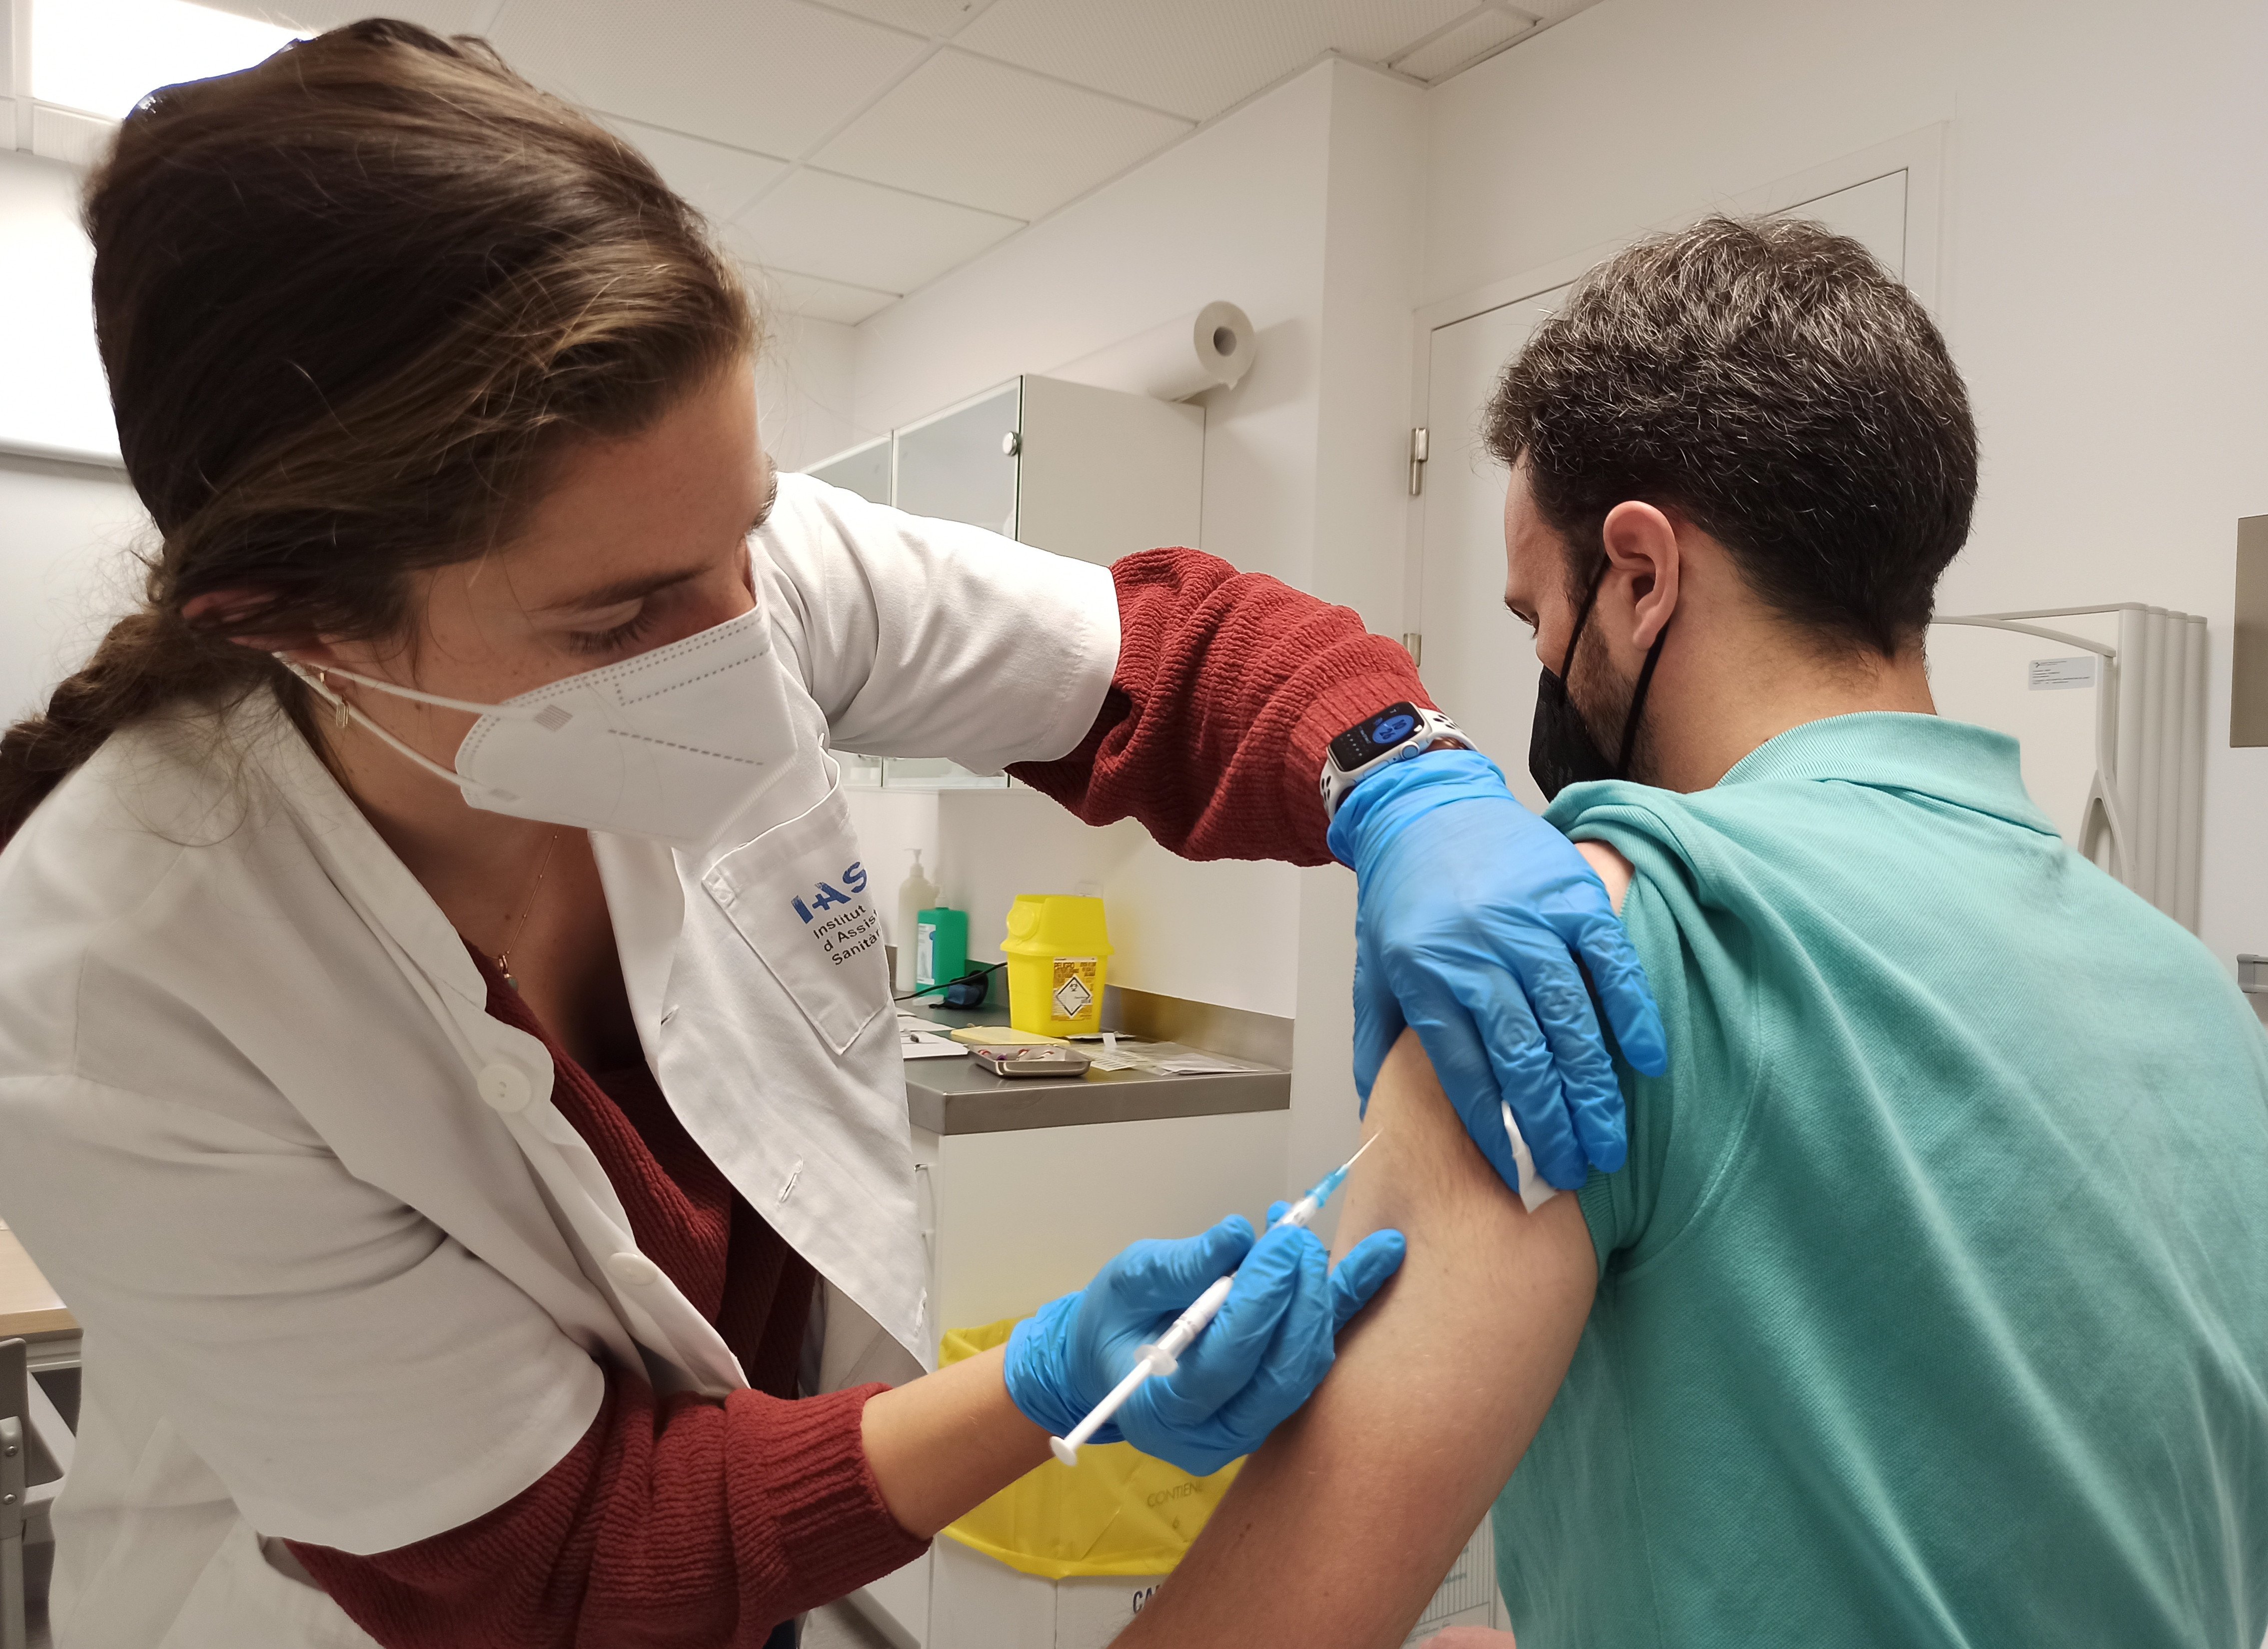 EU success for Catalan-developed vaccine Hipra as Brussels orders 250 million doses